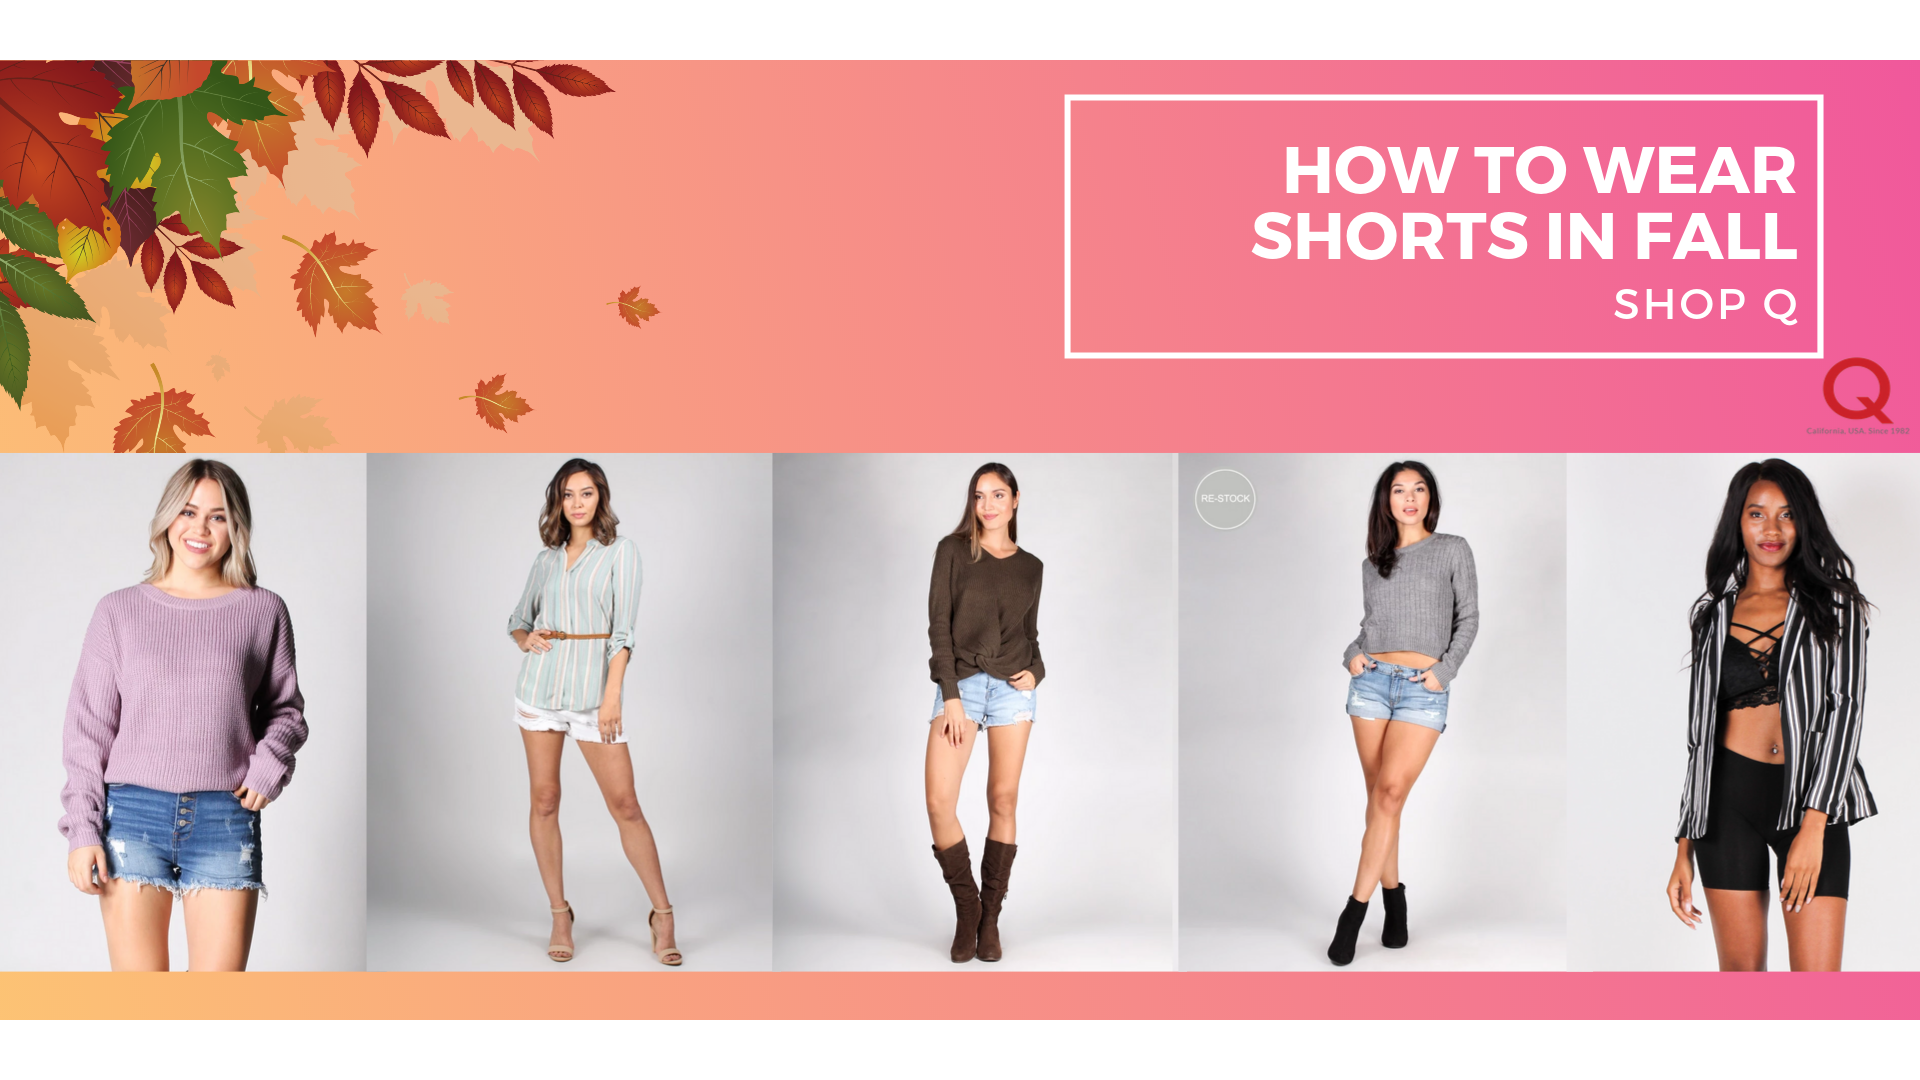 How to Wear Shorts in Fall